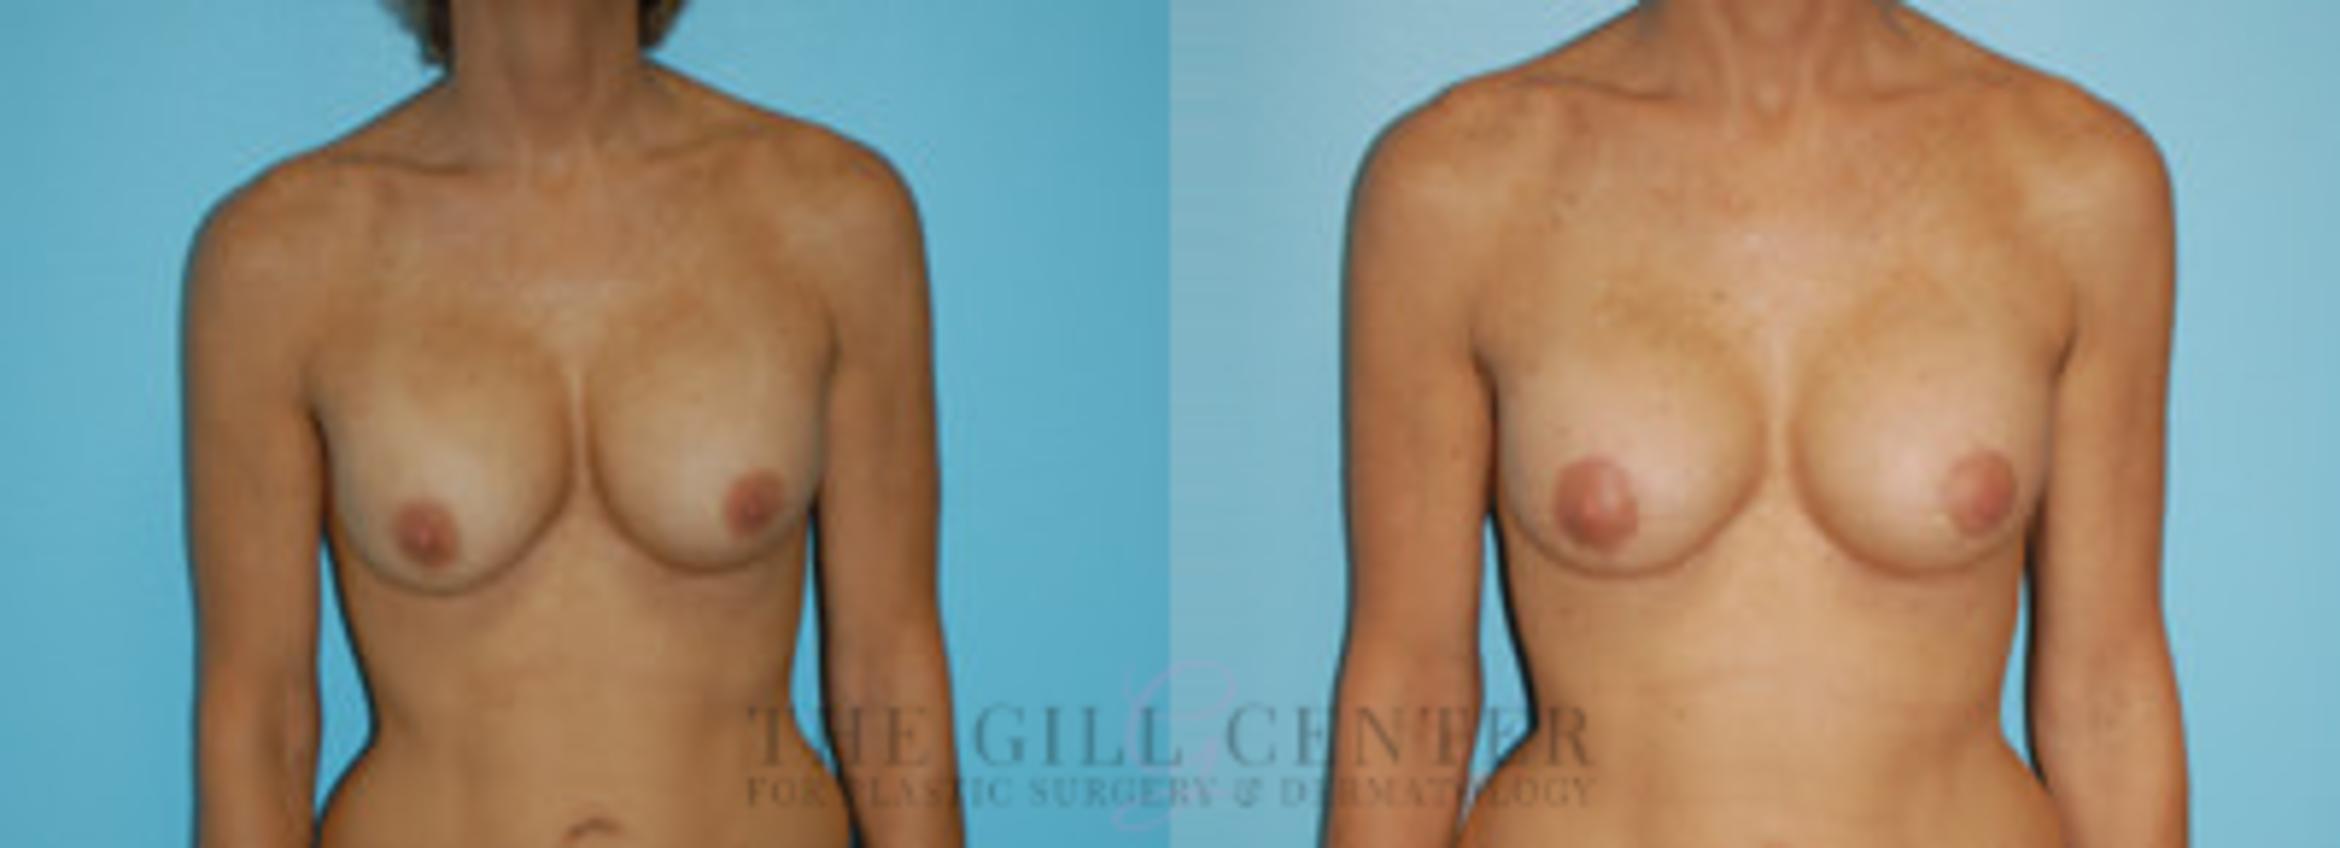 Breast Revision Case 385 Before & After Front | The Woodlands, TX | The Gill Center for Plastic Surgery and Dermatology